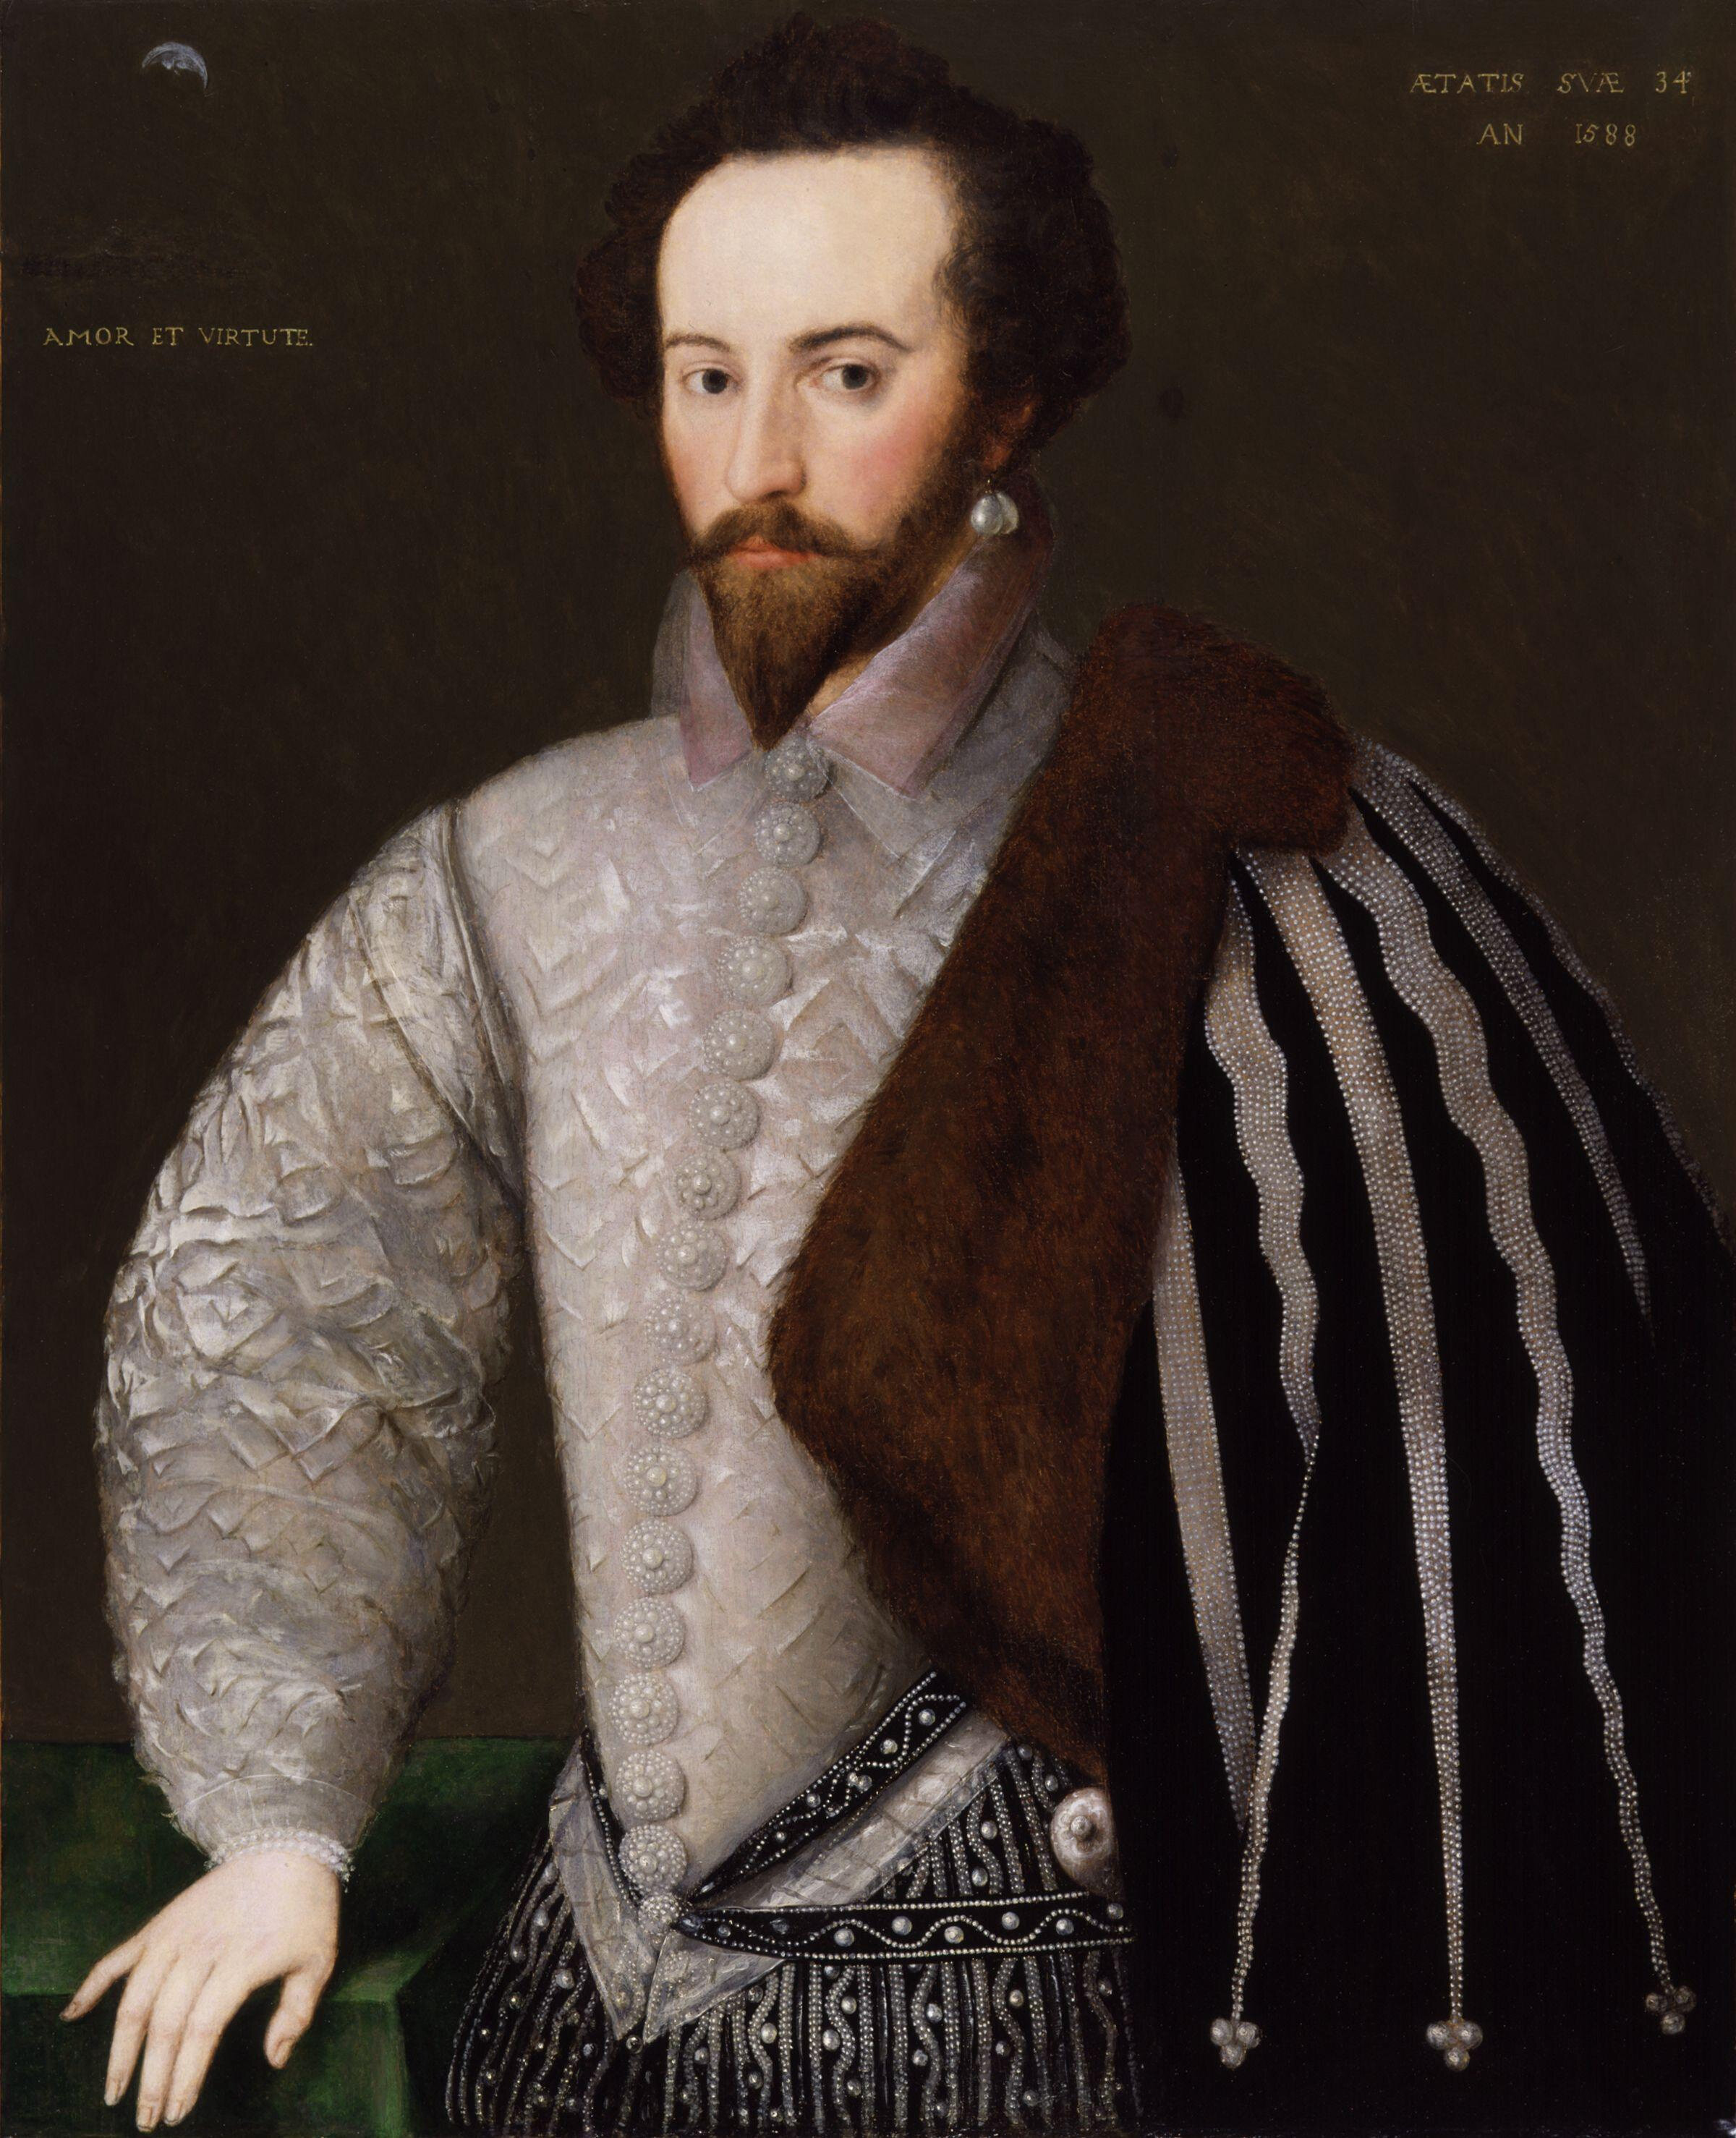  Sir Walter Raleigh, from 1588 